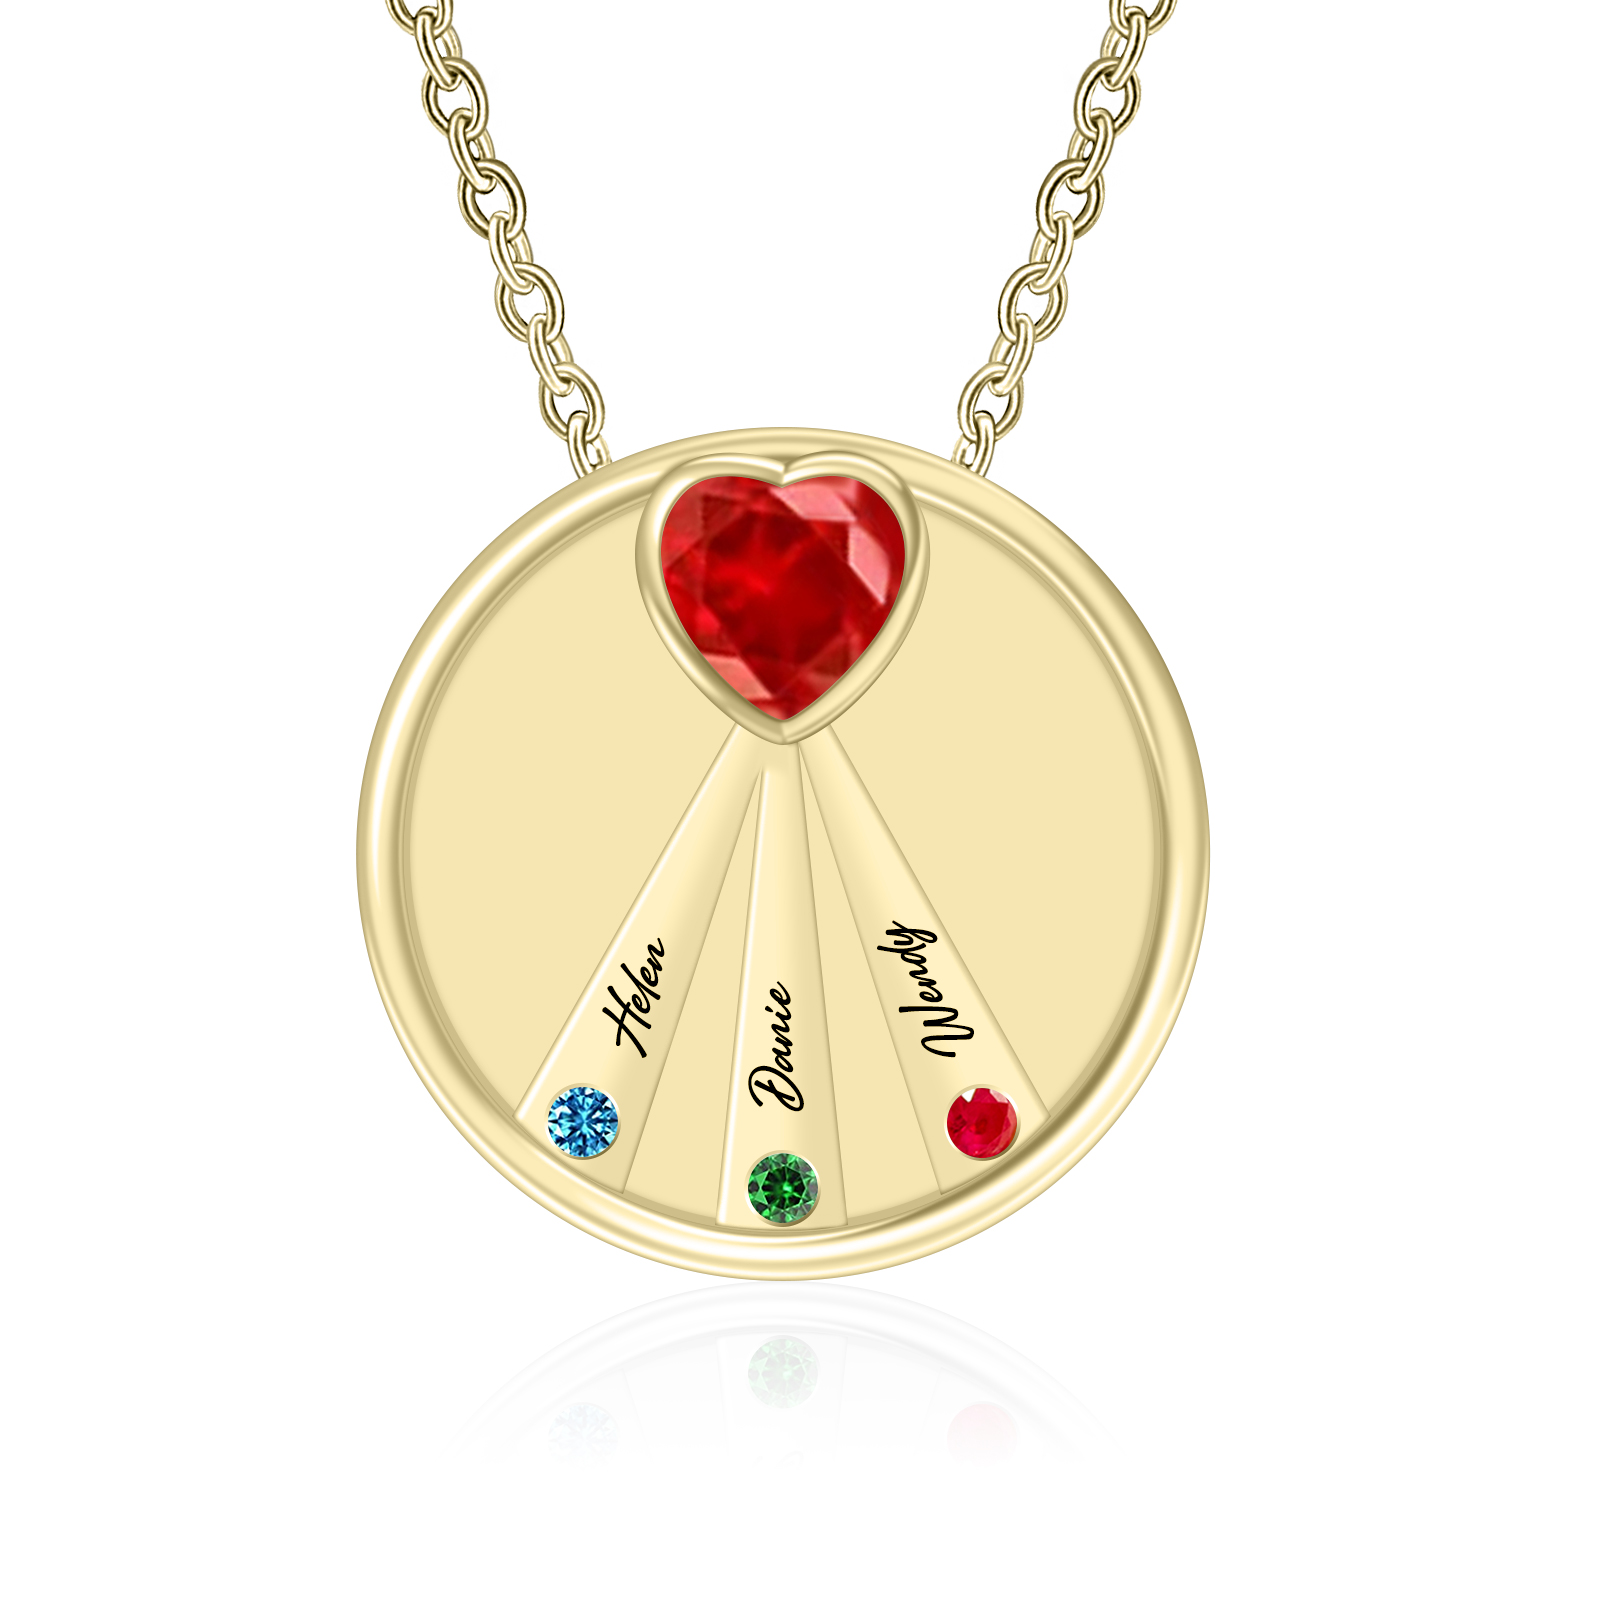 Reunion Birthstone Necklace with up to 8 Birthstones